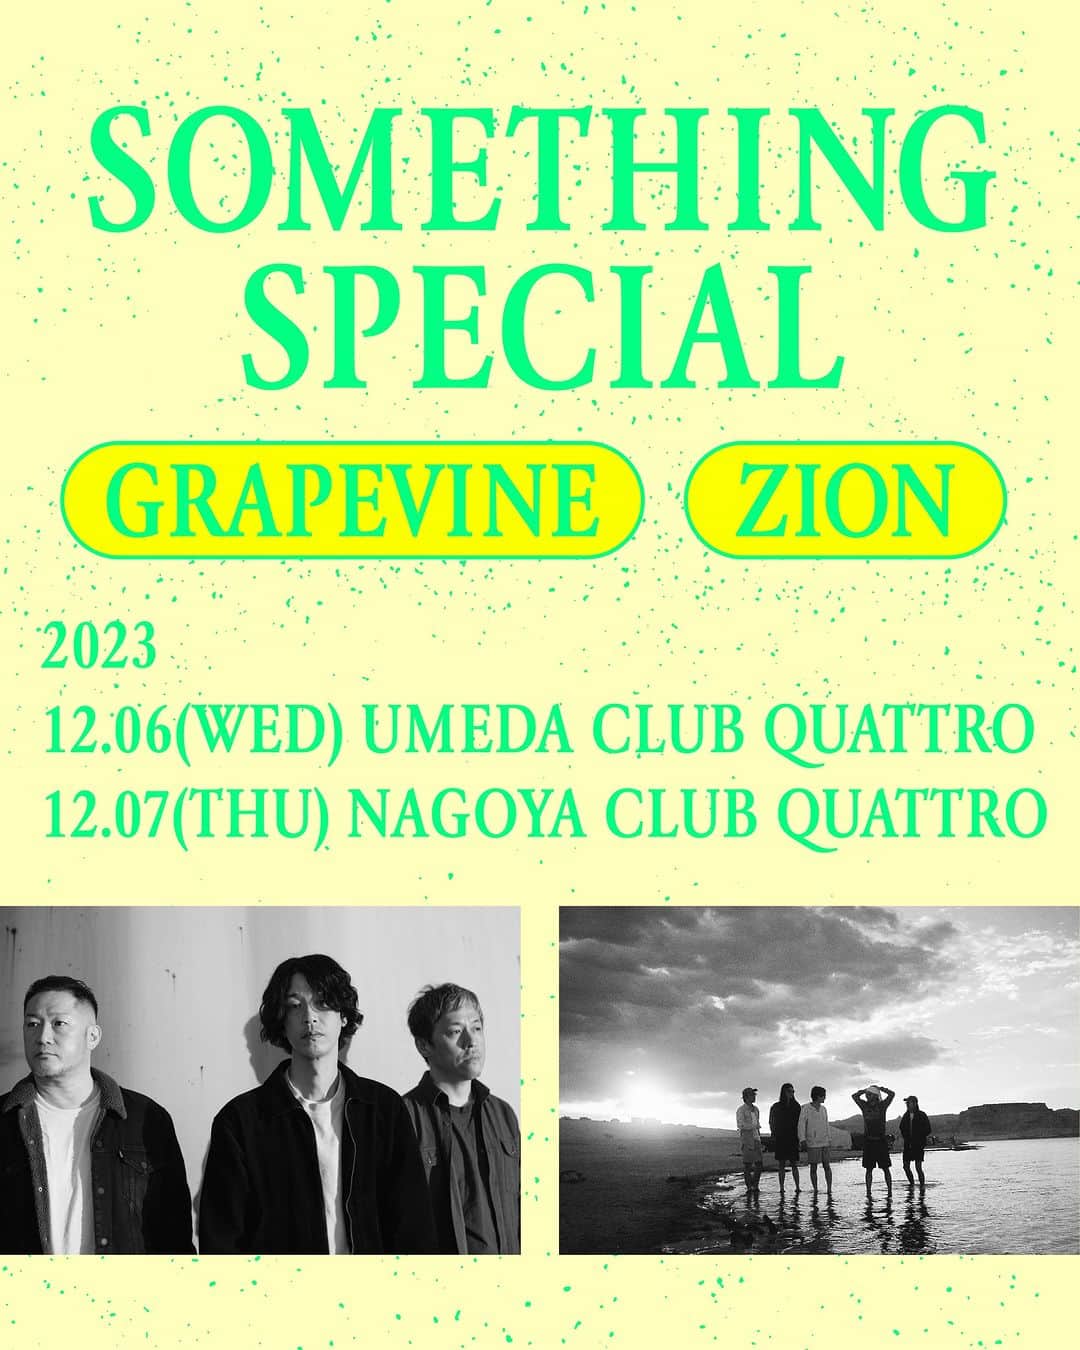 GRAPEVINEのインスタグラム：「SOMETHING SPECIAL GRAPEVINE x ZION  12.06(水) 梅田クラブクアトロ DOOR 18:00 / SHOW 19:00  12.07(木) 名古屋クラブクアトロ DOOR 18:00 / SHOW19:00  ACT  GRAPEVINE ZION  光村龍哉(Vocal,Guitar)  櫛野啓介(Guitar)  吉澤幸男(Guitar)  鳴橋大地(Drums)  佐藤慎之介(Bass) @zion_shinnosuke   LINK IN BIO  #GRAPEVINE #ZION #SOMETHINGSPECIAL #ALMOSTTHERE #停電の夜 #雀の子 #UB #ziontheband」